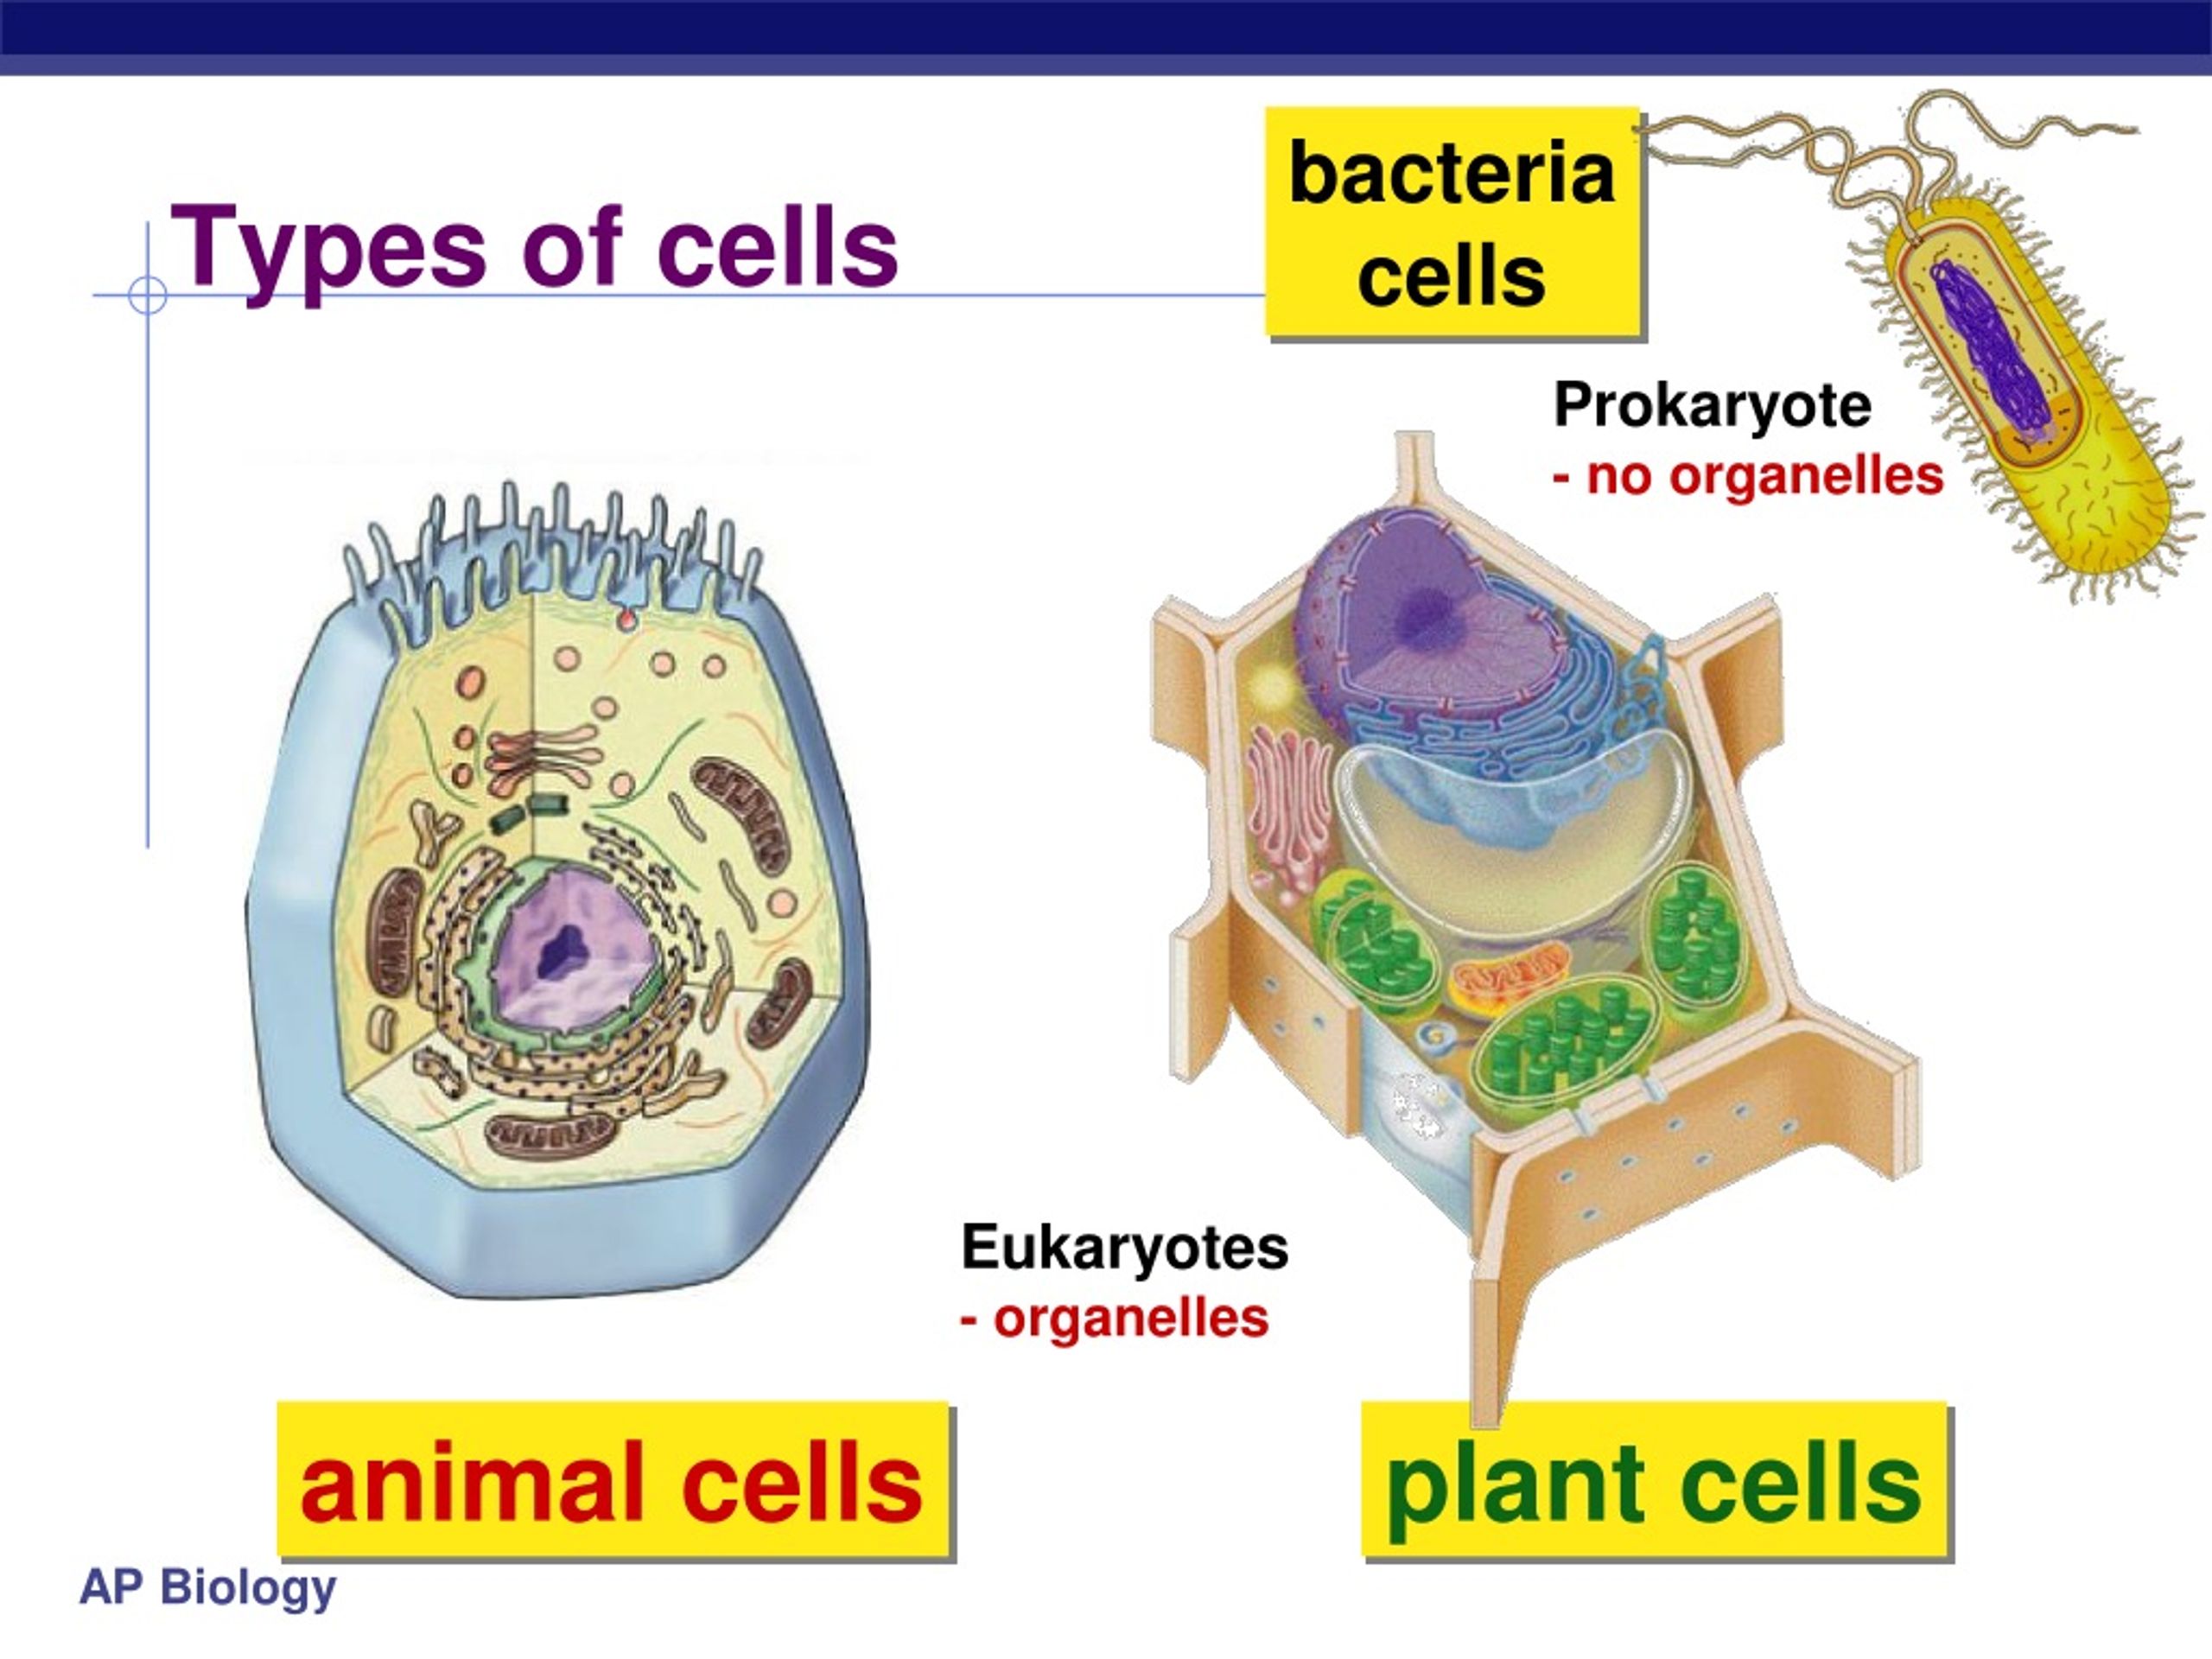 PPT - Types of cells PowerPoint Presentation, free download - ID:179932